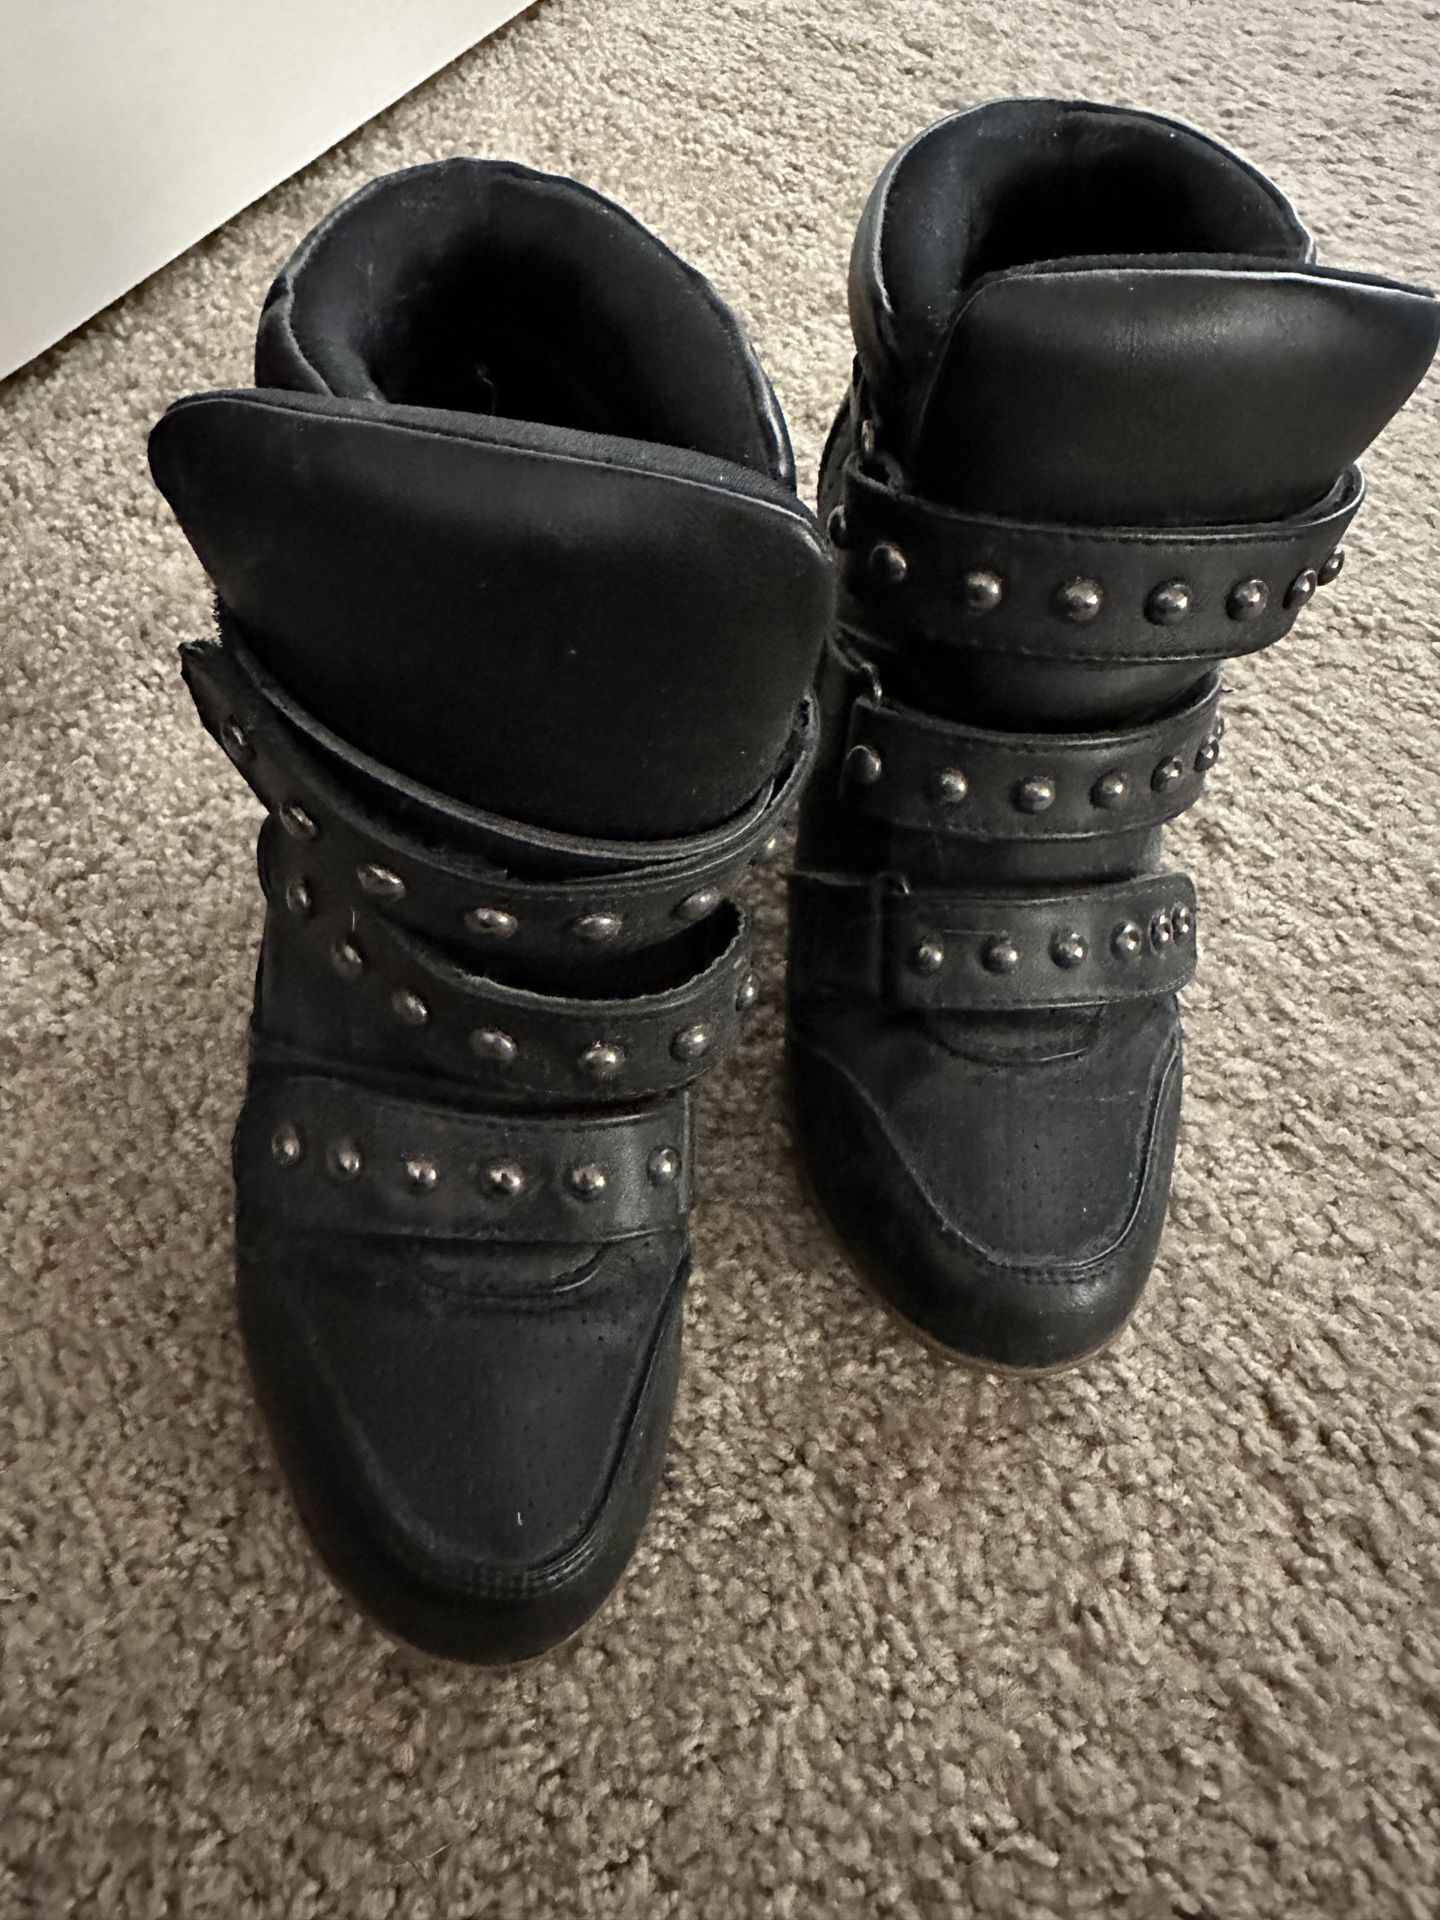 Black Platform Sneakers From Forever 21 - Size 8